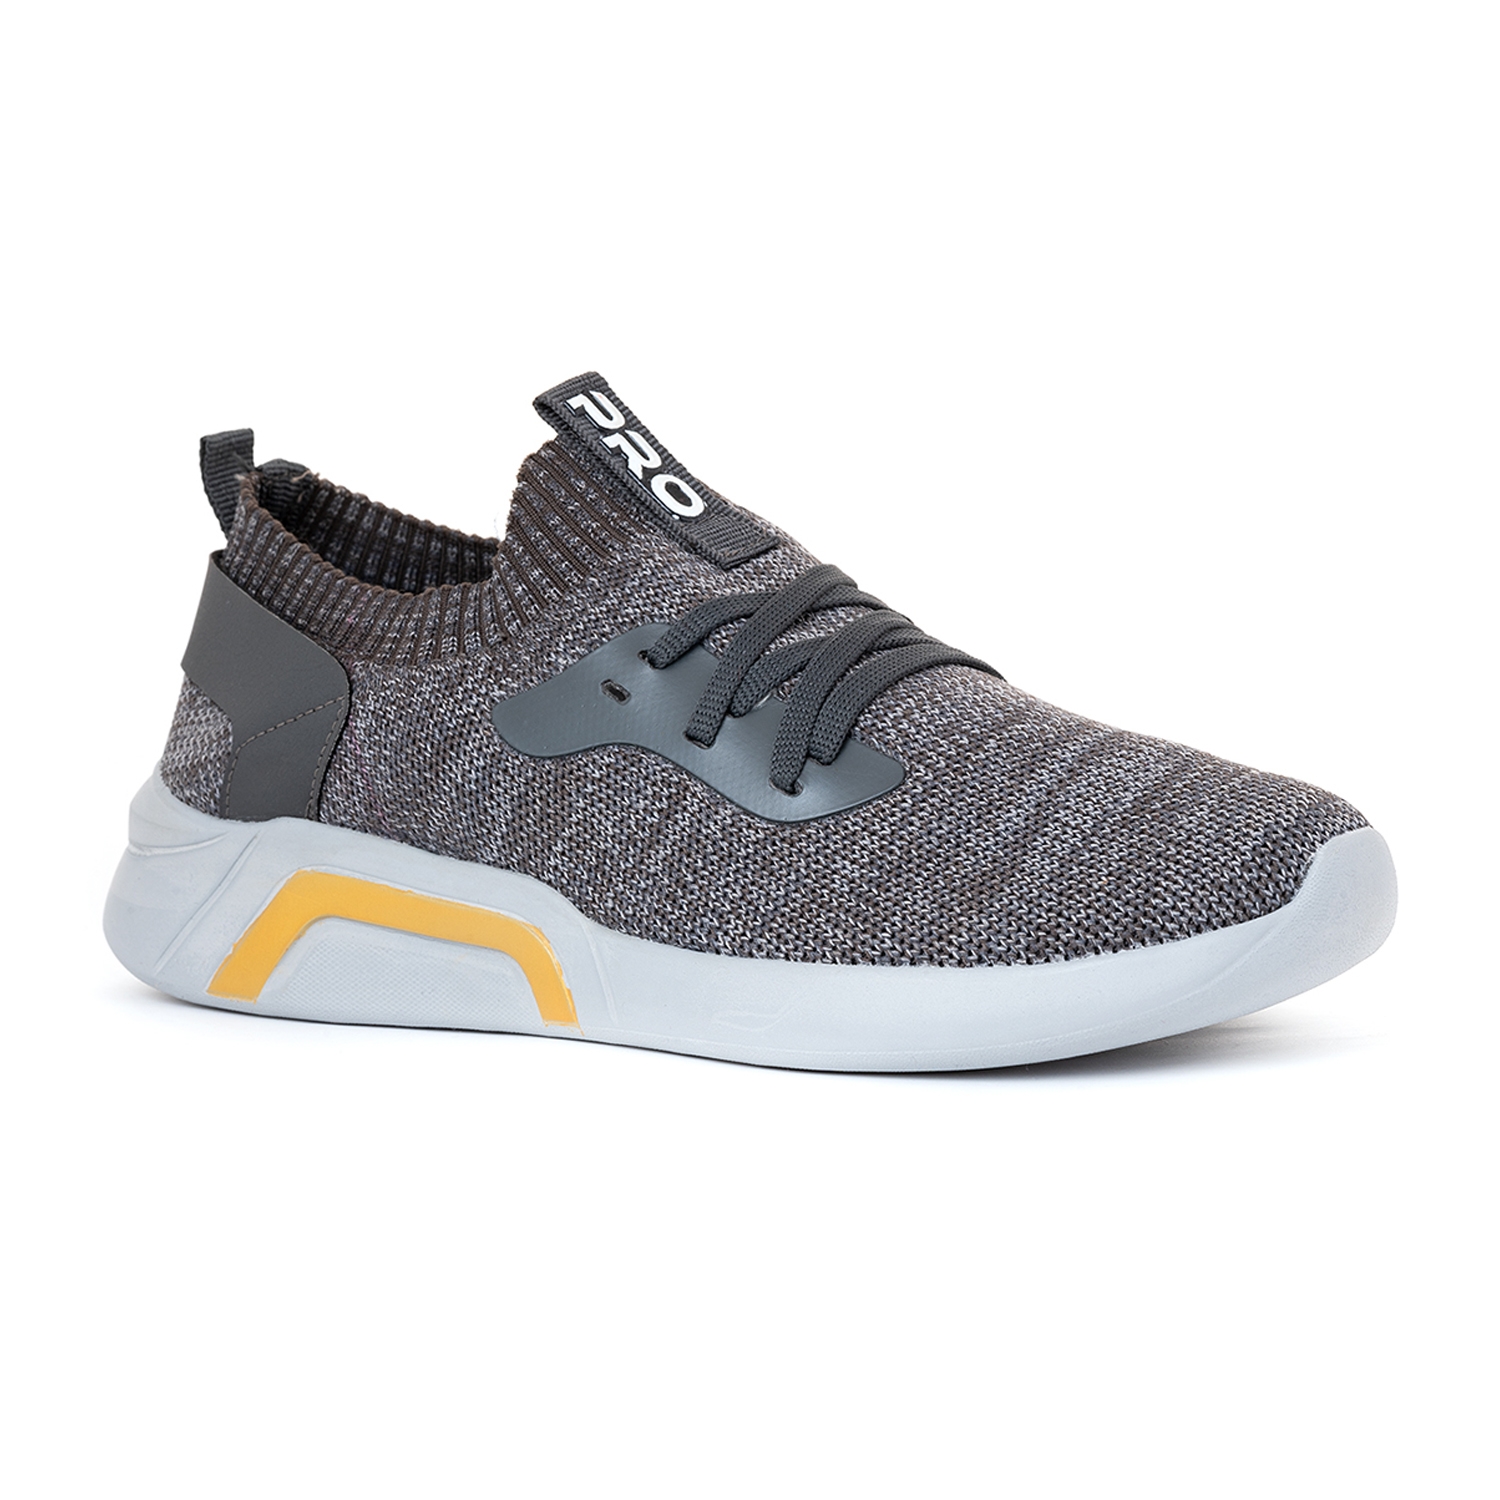 Pro Grey Running Sports Shoes for Men